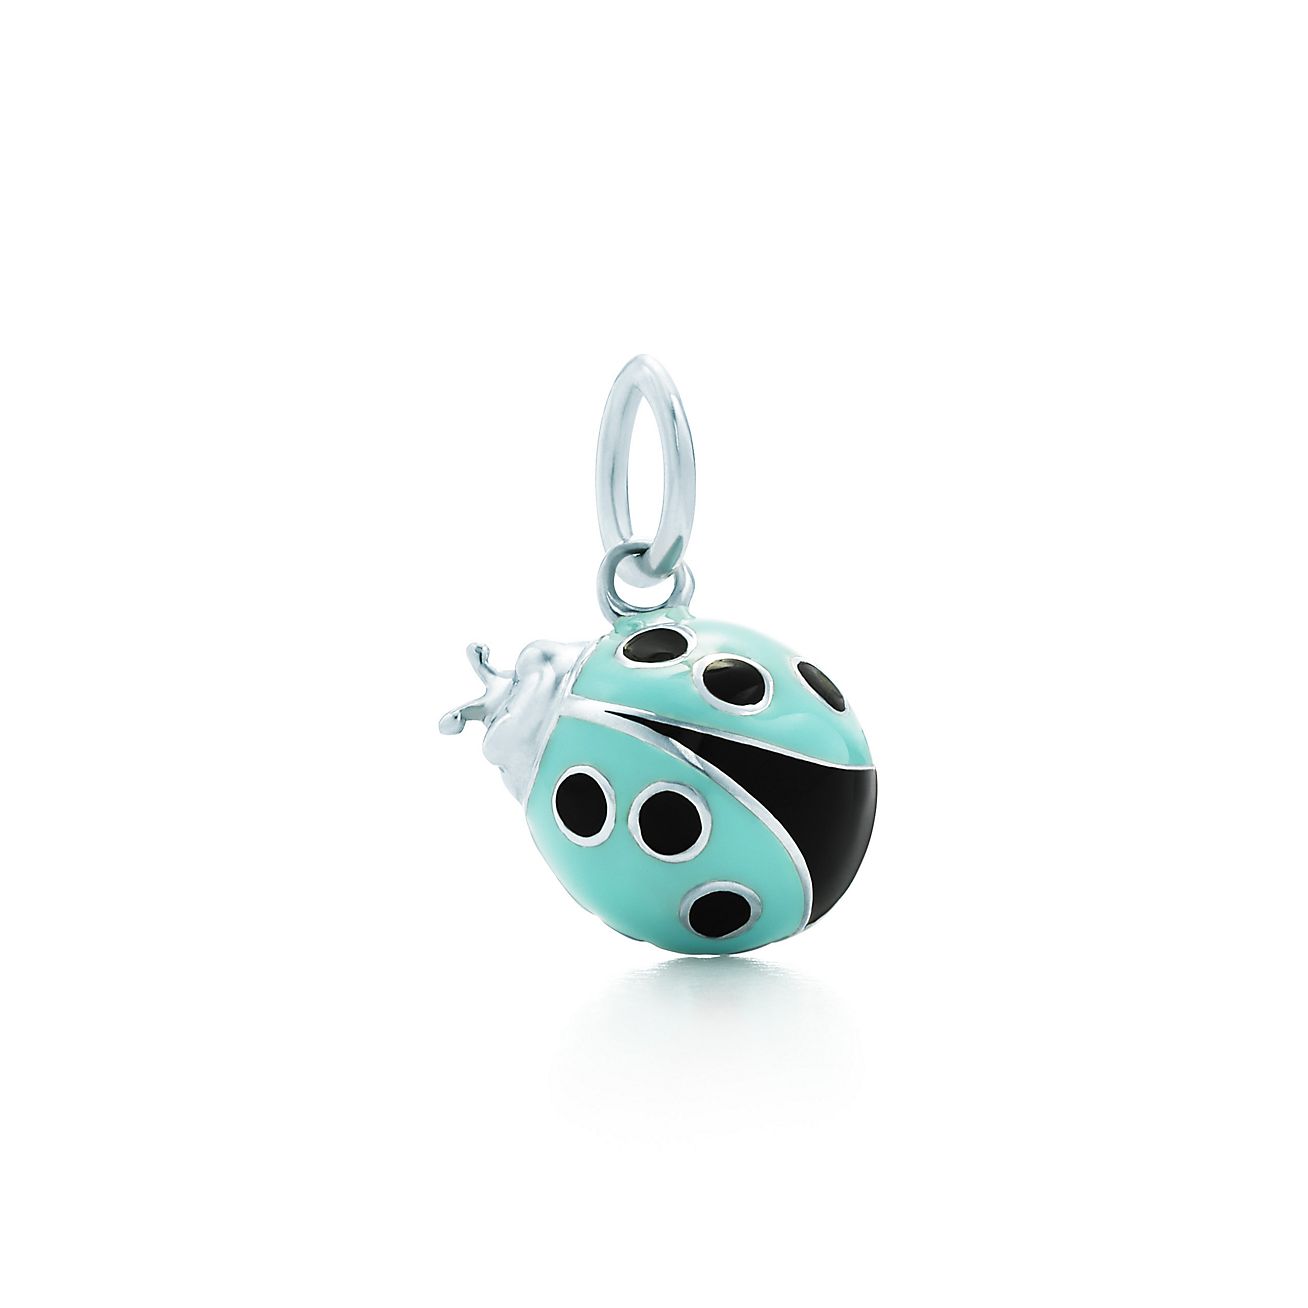 Ladybug charm in sterling silver with 